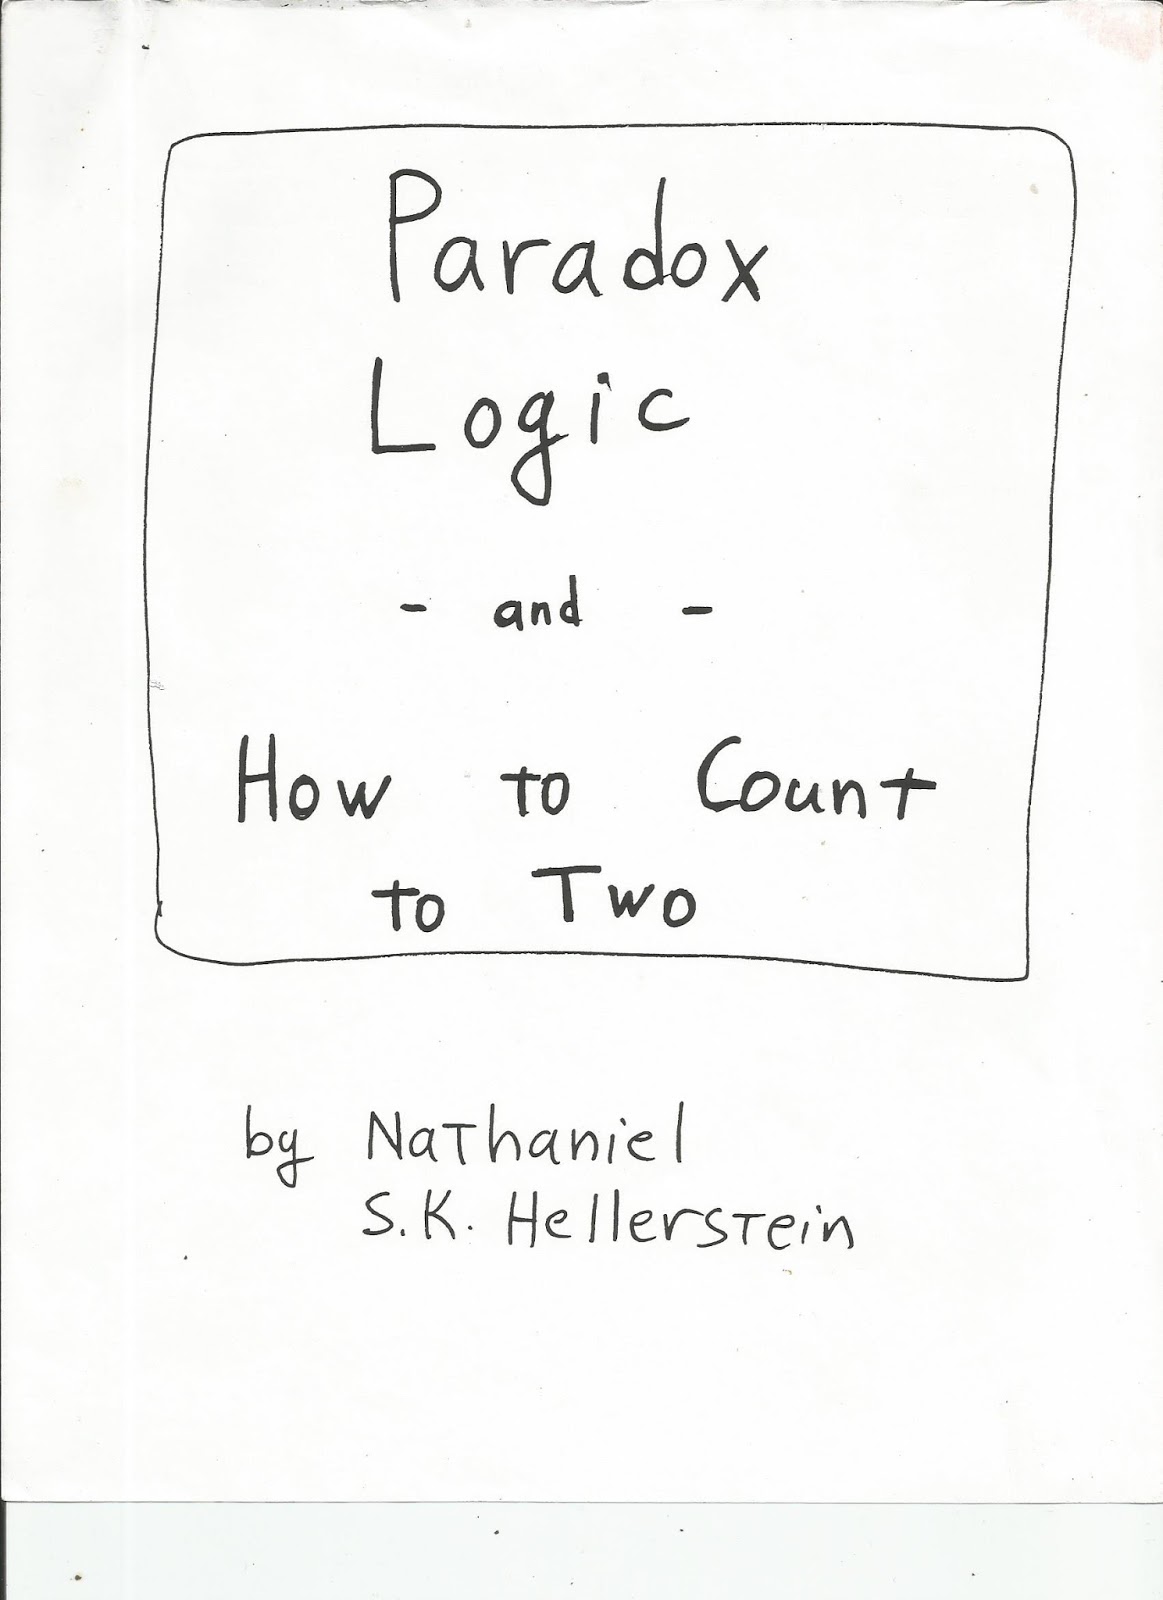 paradox-point-paradox-logic-and-how-to-count-to-two-1-5-of-31